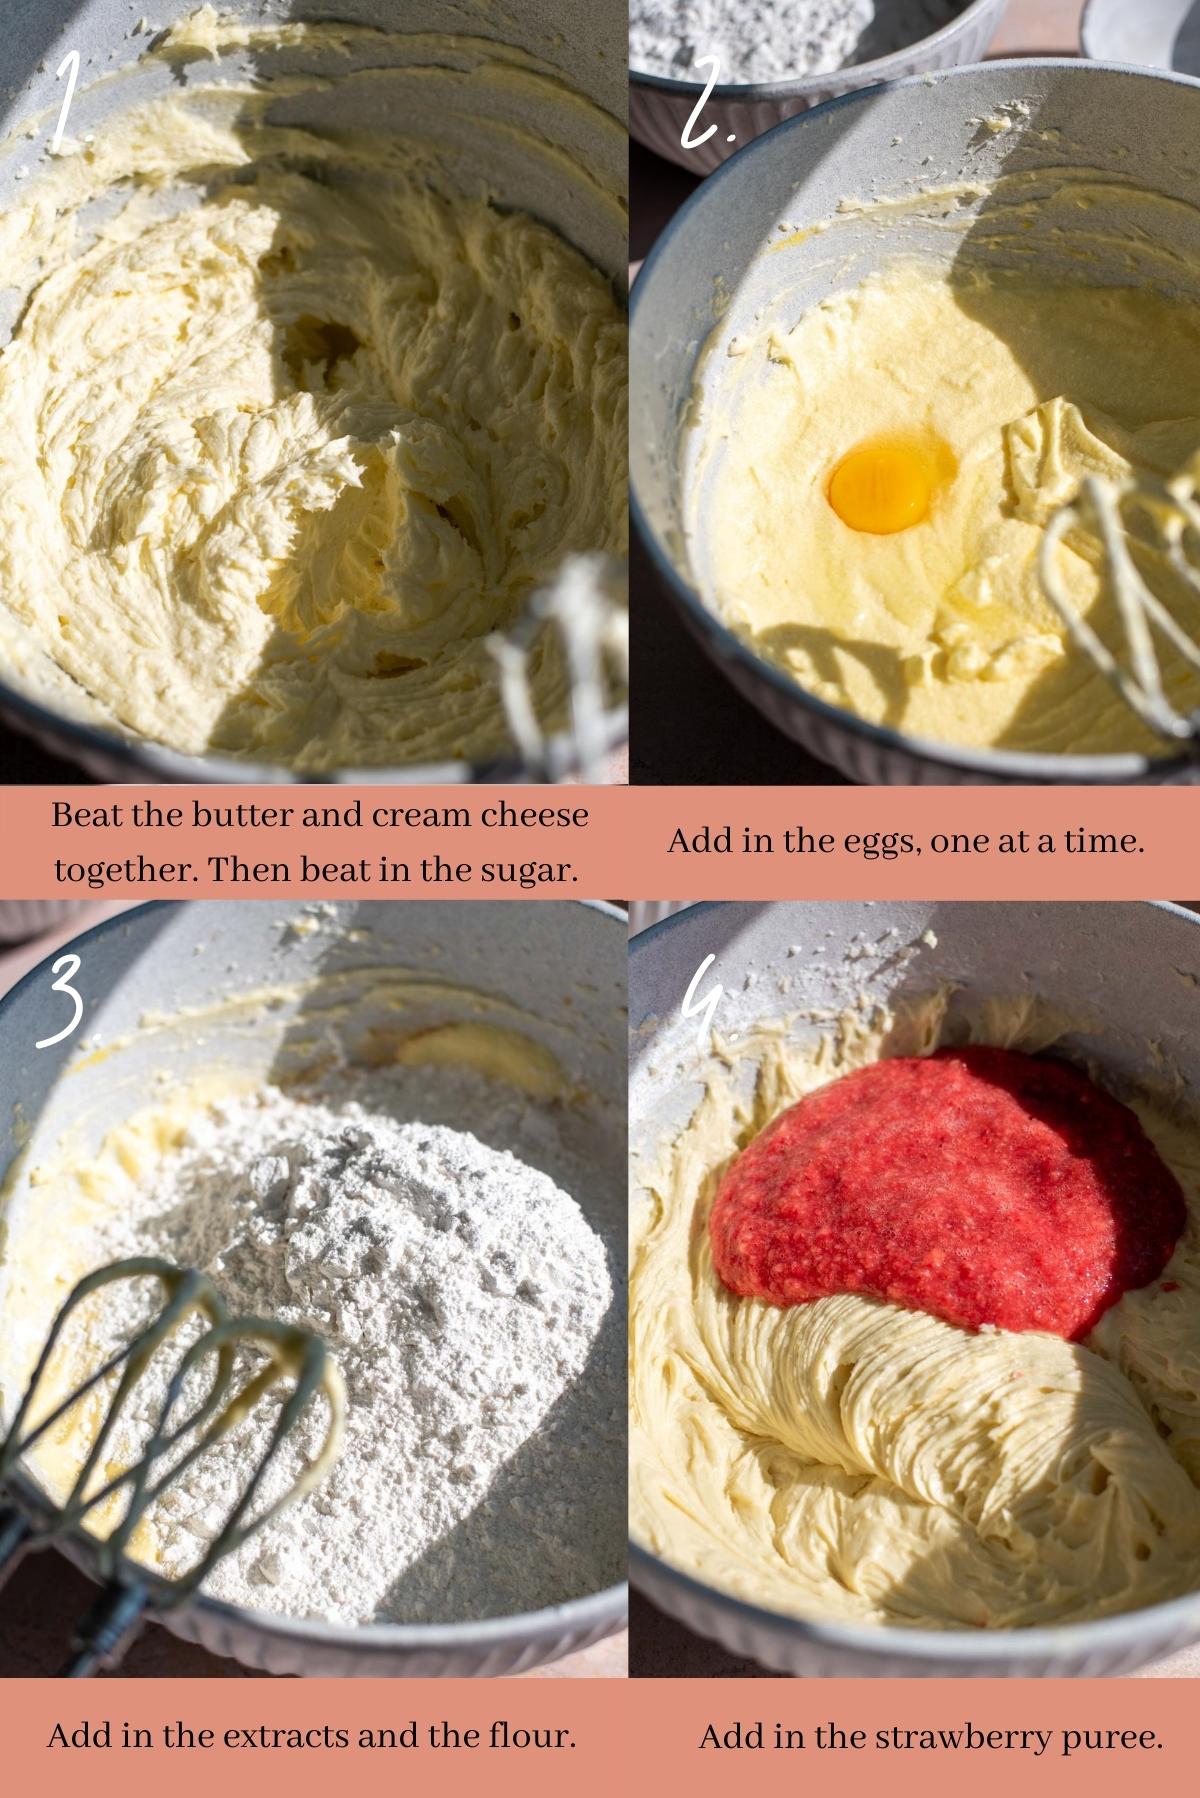 Collage showing how to make strawberry pound cake.